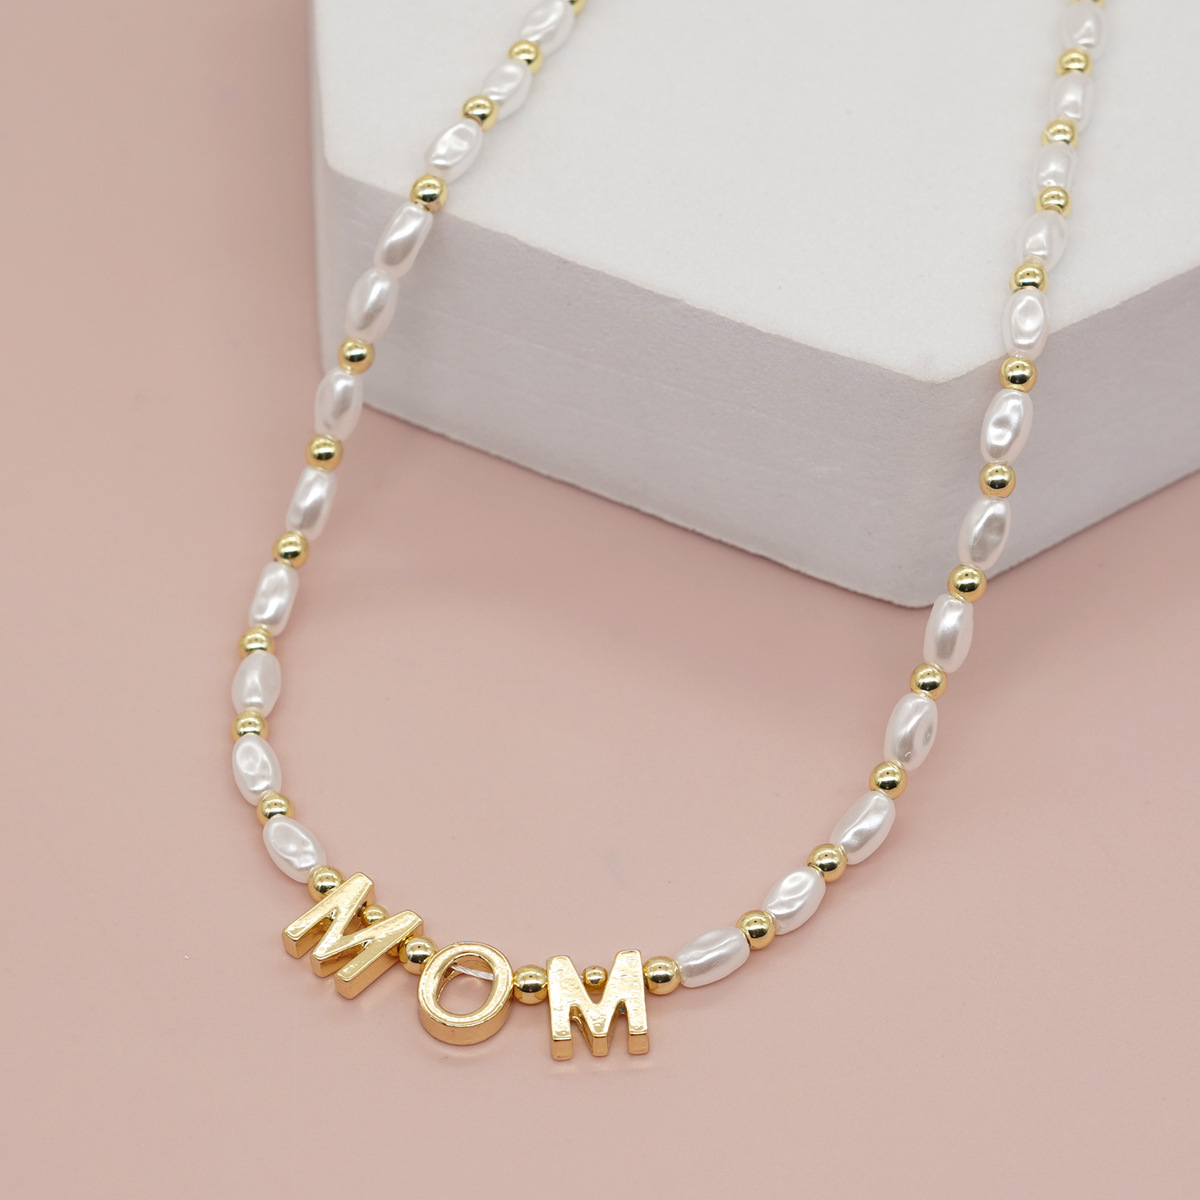 Simple pearl women’s necklace for mother’s day